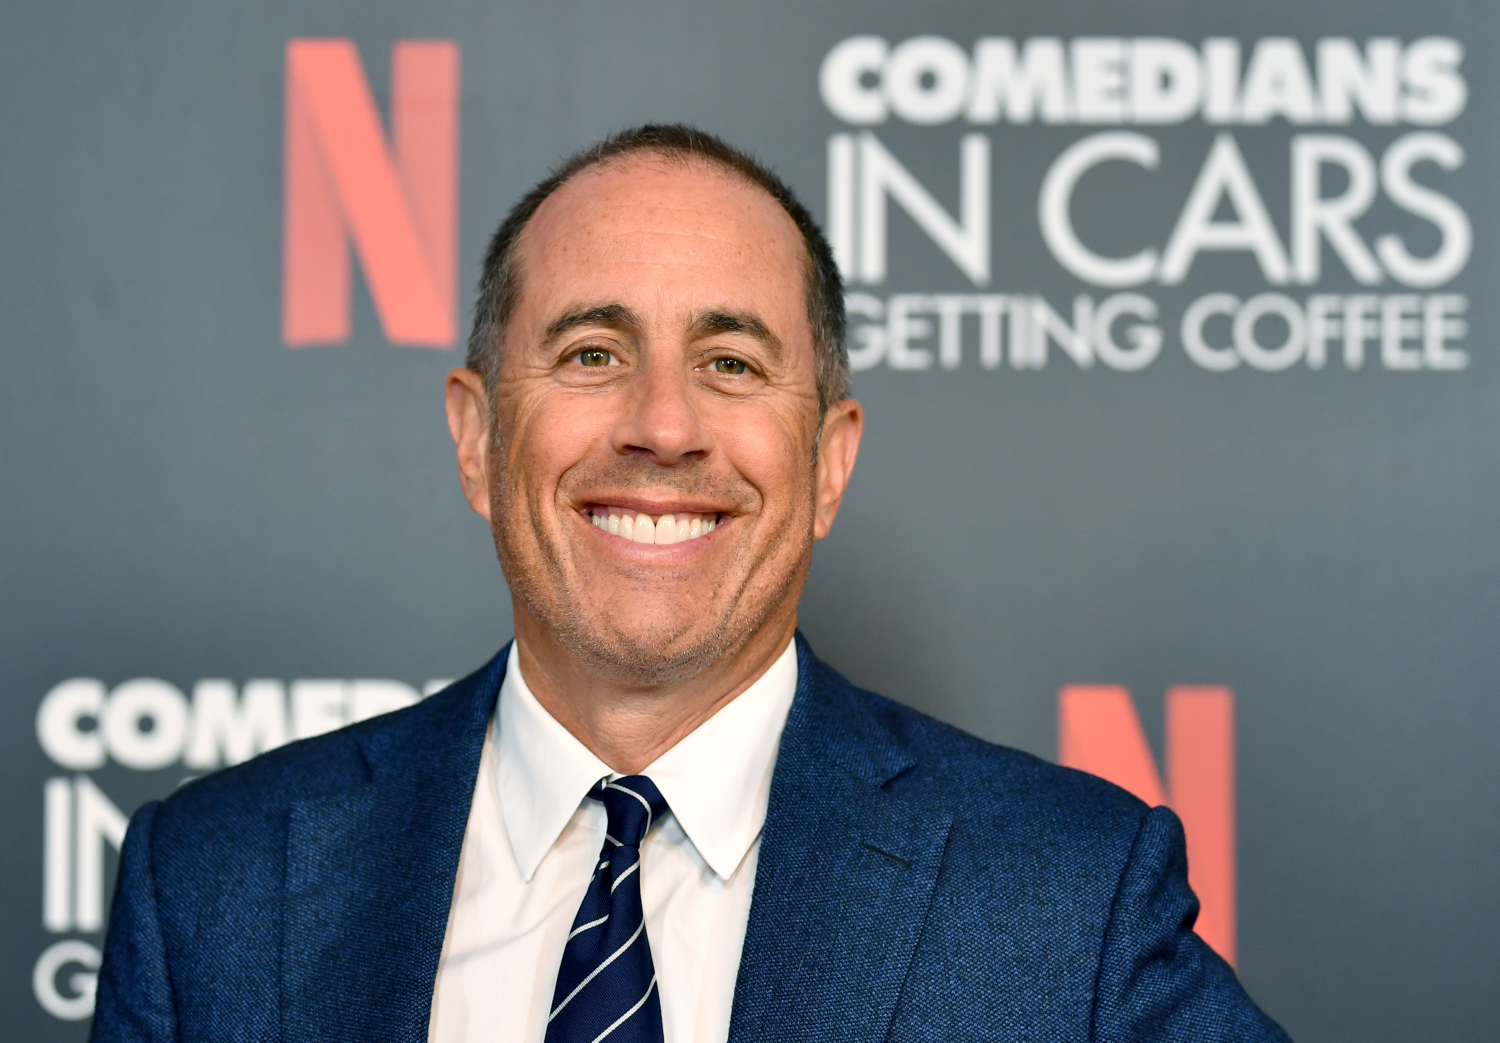 Jerry Seinfeld ‘Couldn’t Stop Laughing’ About His Upcoming Pop-Tarts Movie